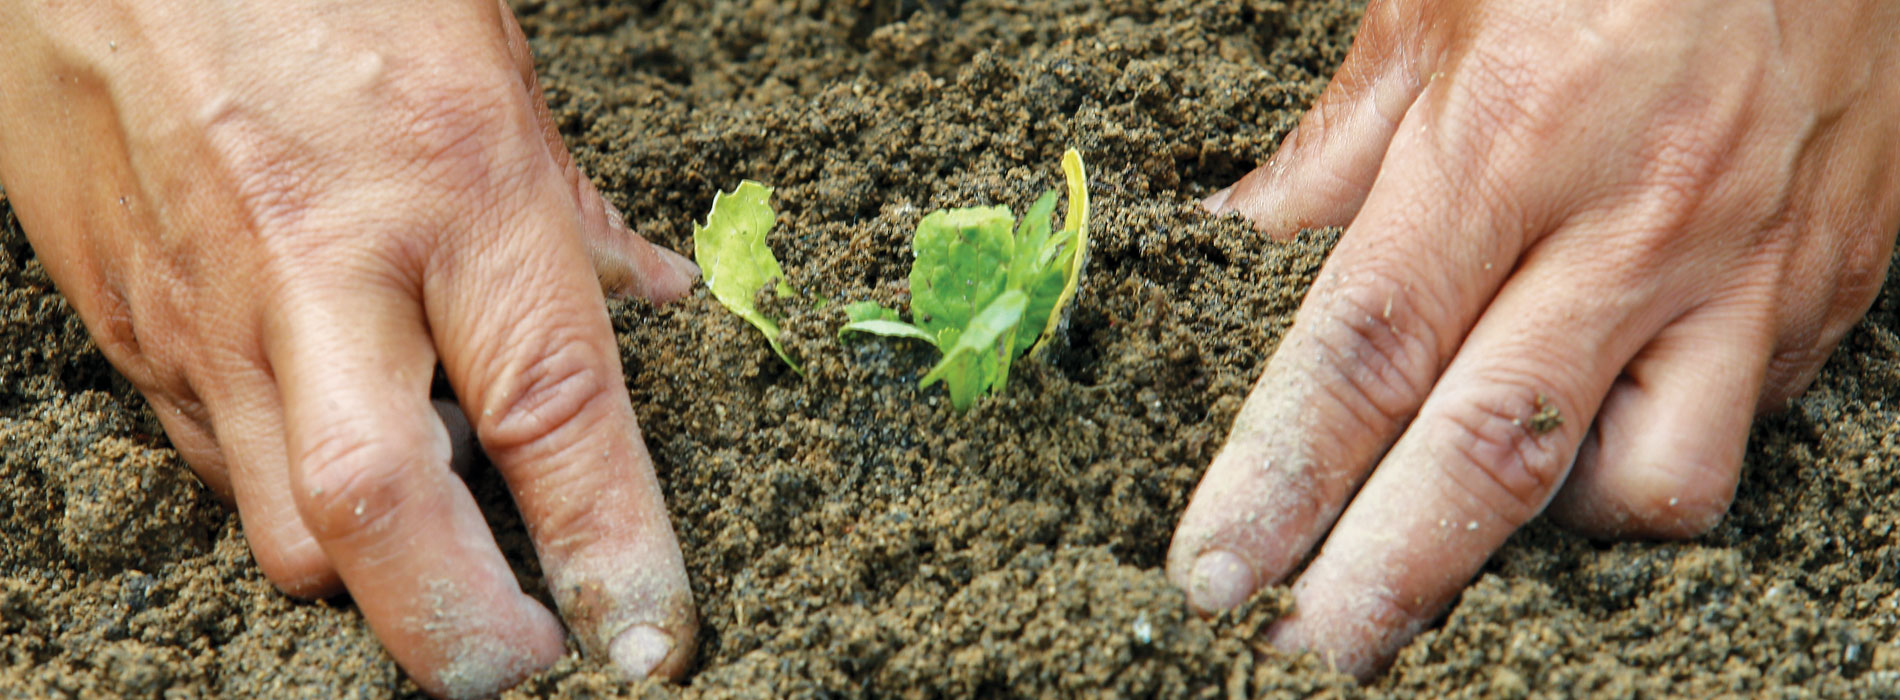 Hands in the soil on either side of a seedling